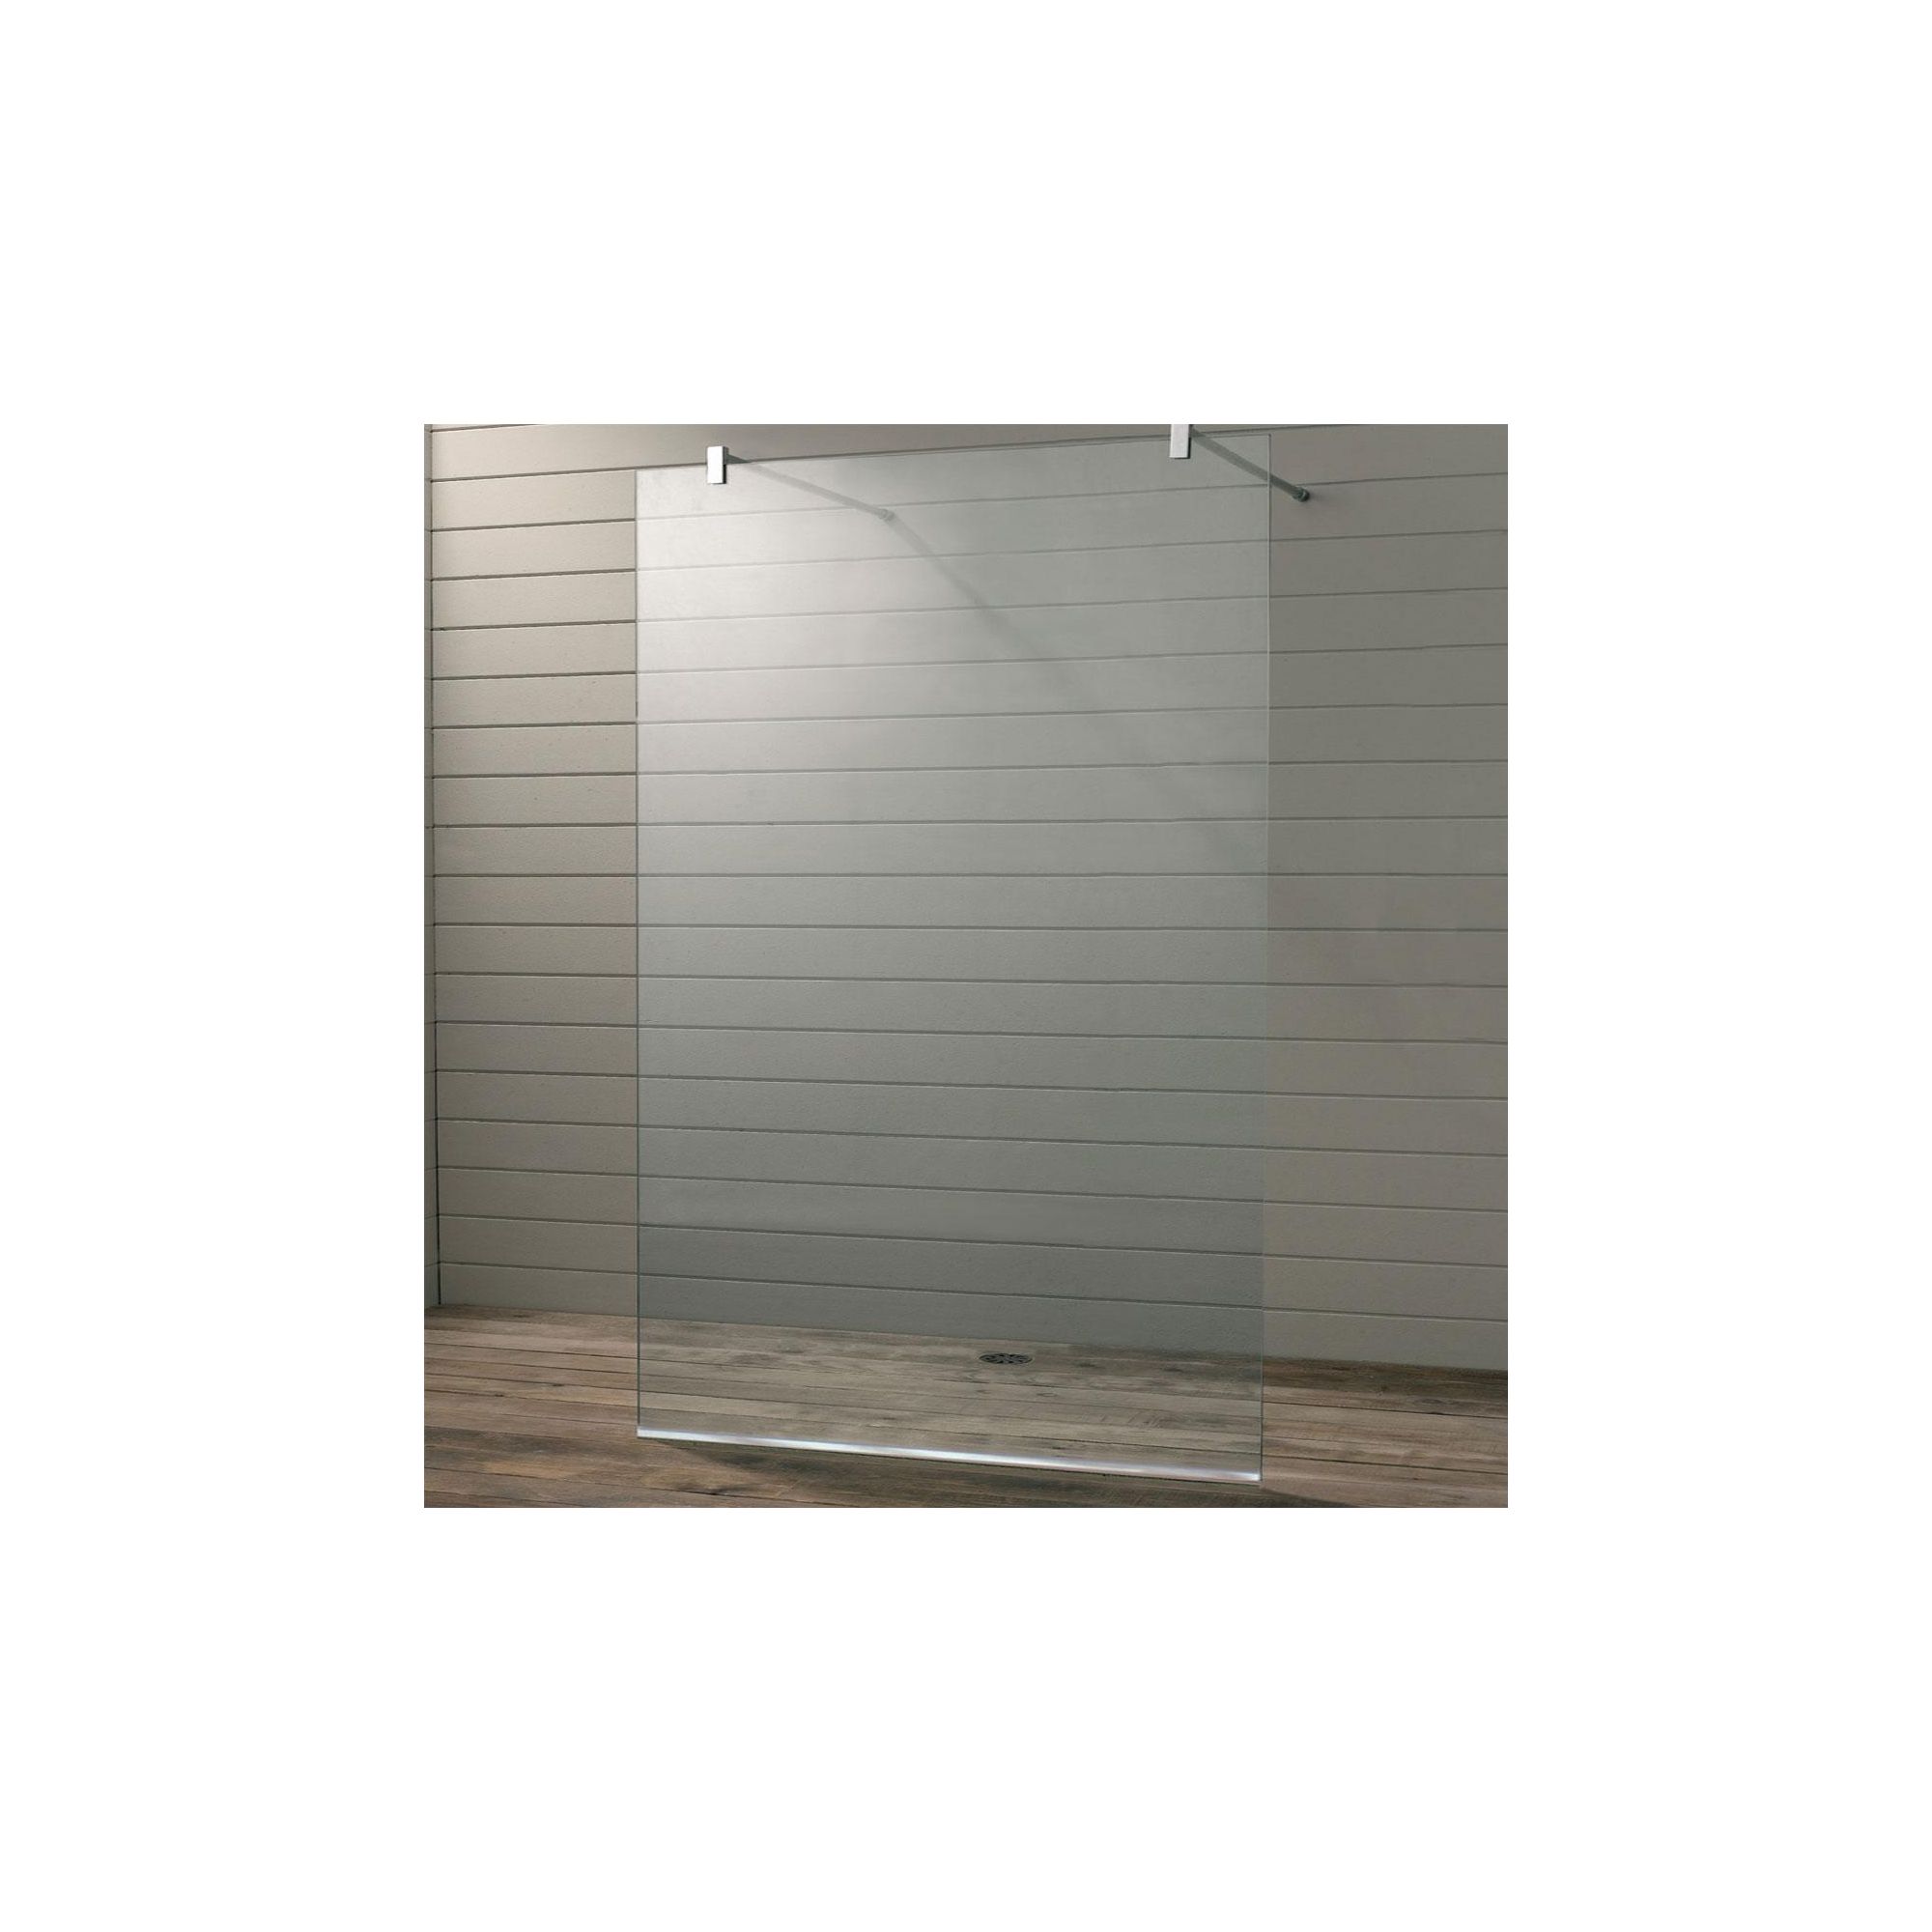 Duchy Premium Wet Room Glass Shower Panel, 760mm Wide, 10mm Glass at Tesco Direct